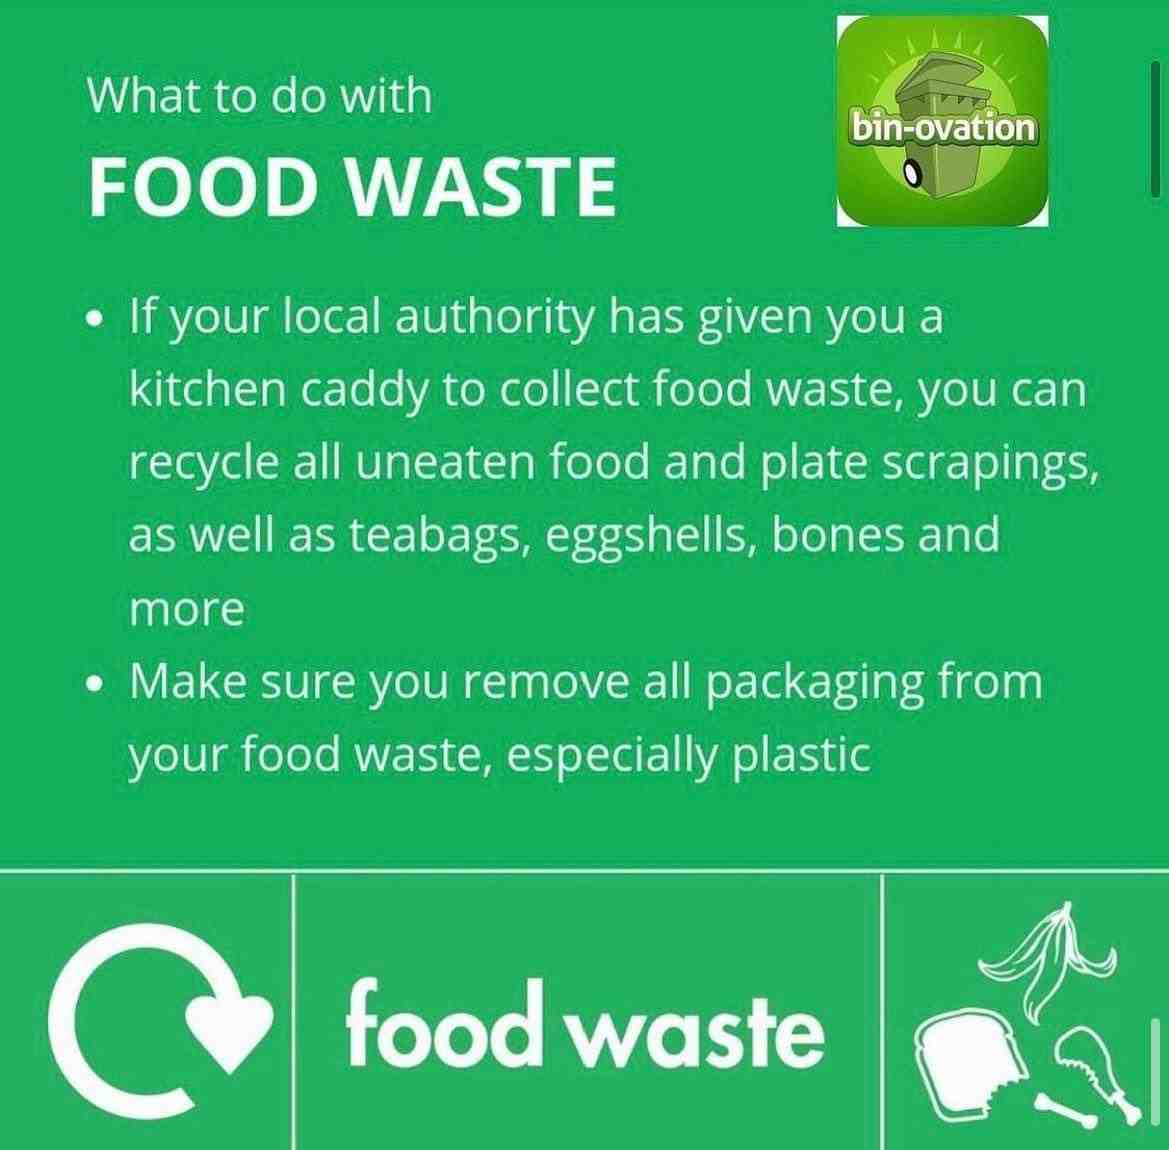 How do you reuse kitchen waste and recycle?